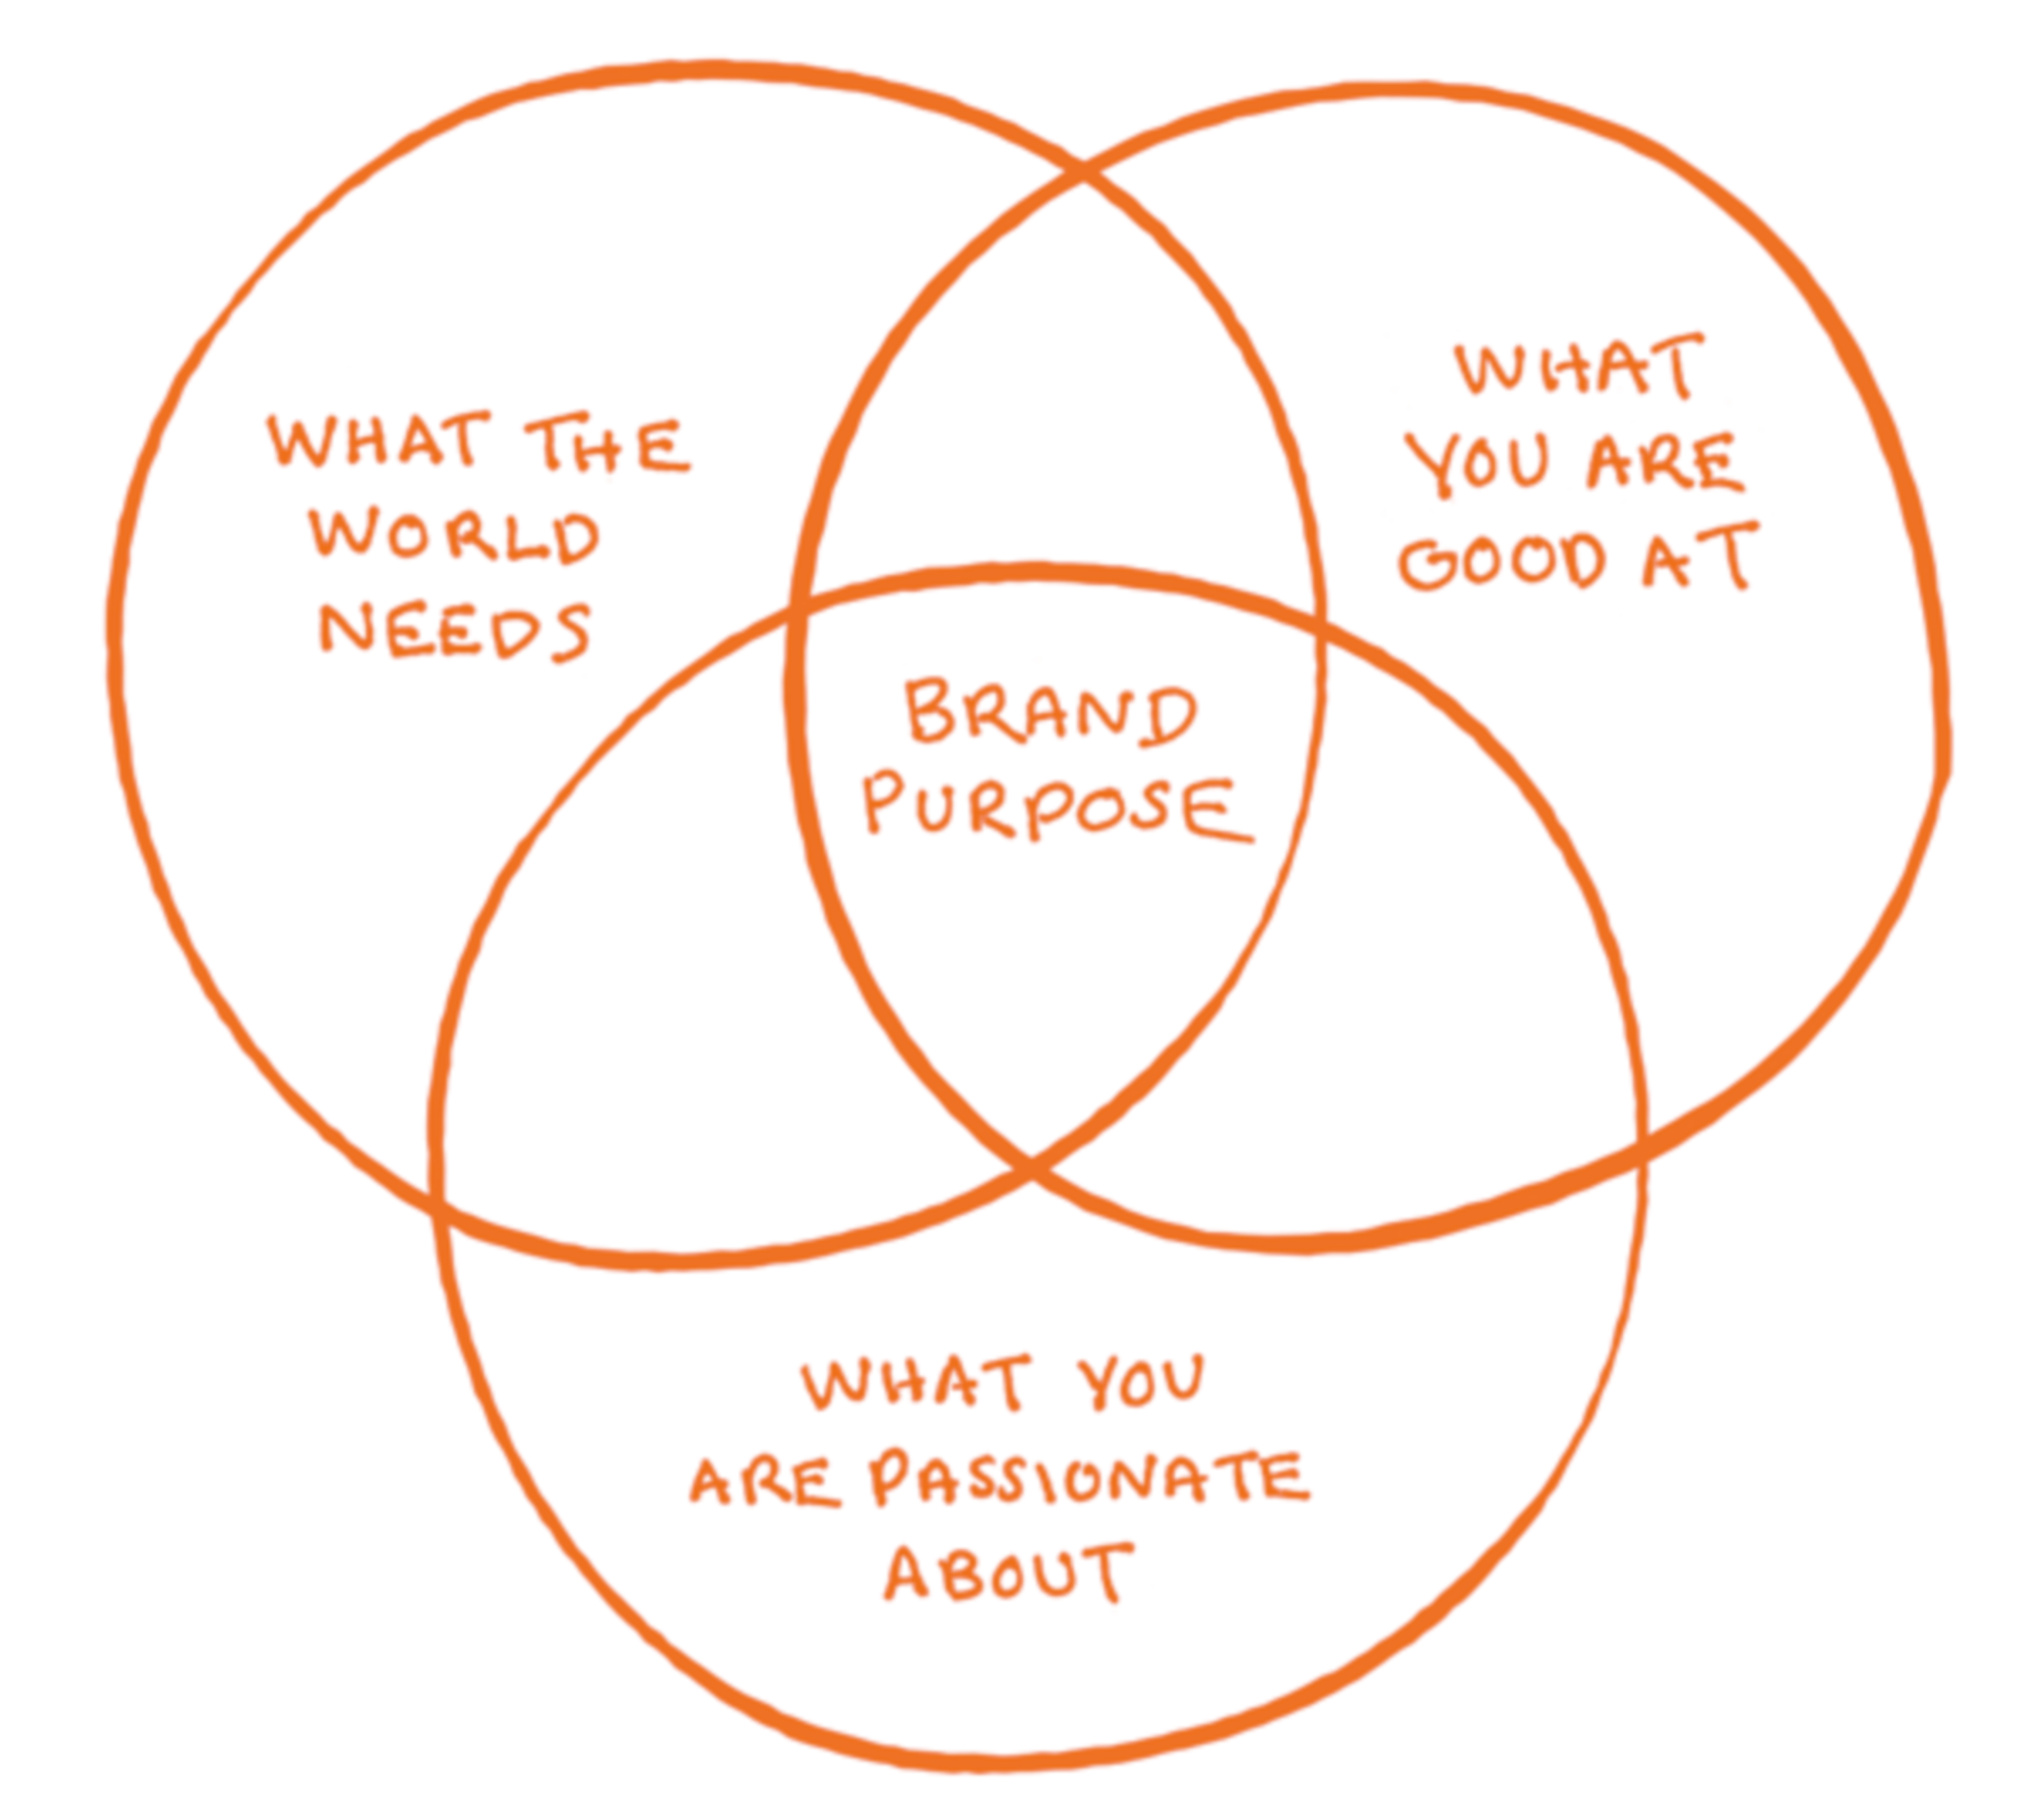 Focusing On Branding, Not the Product